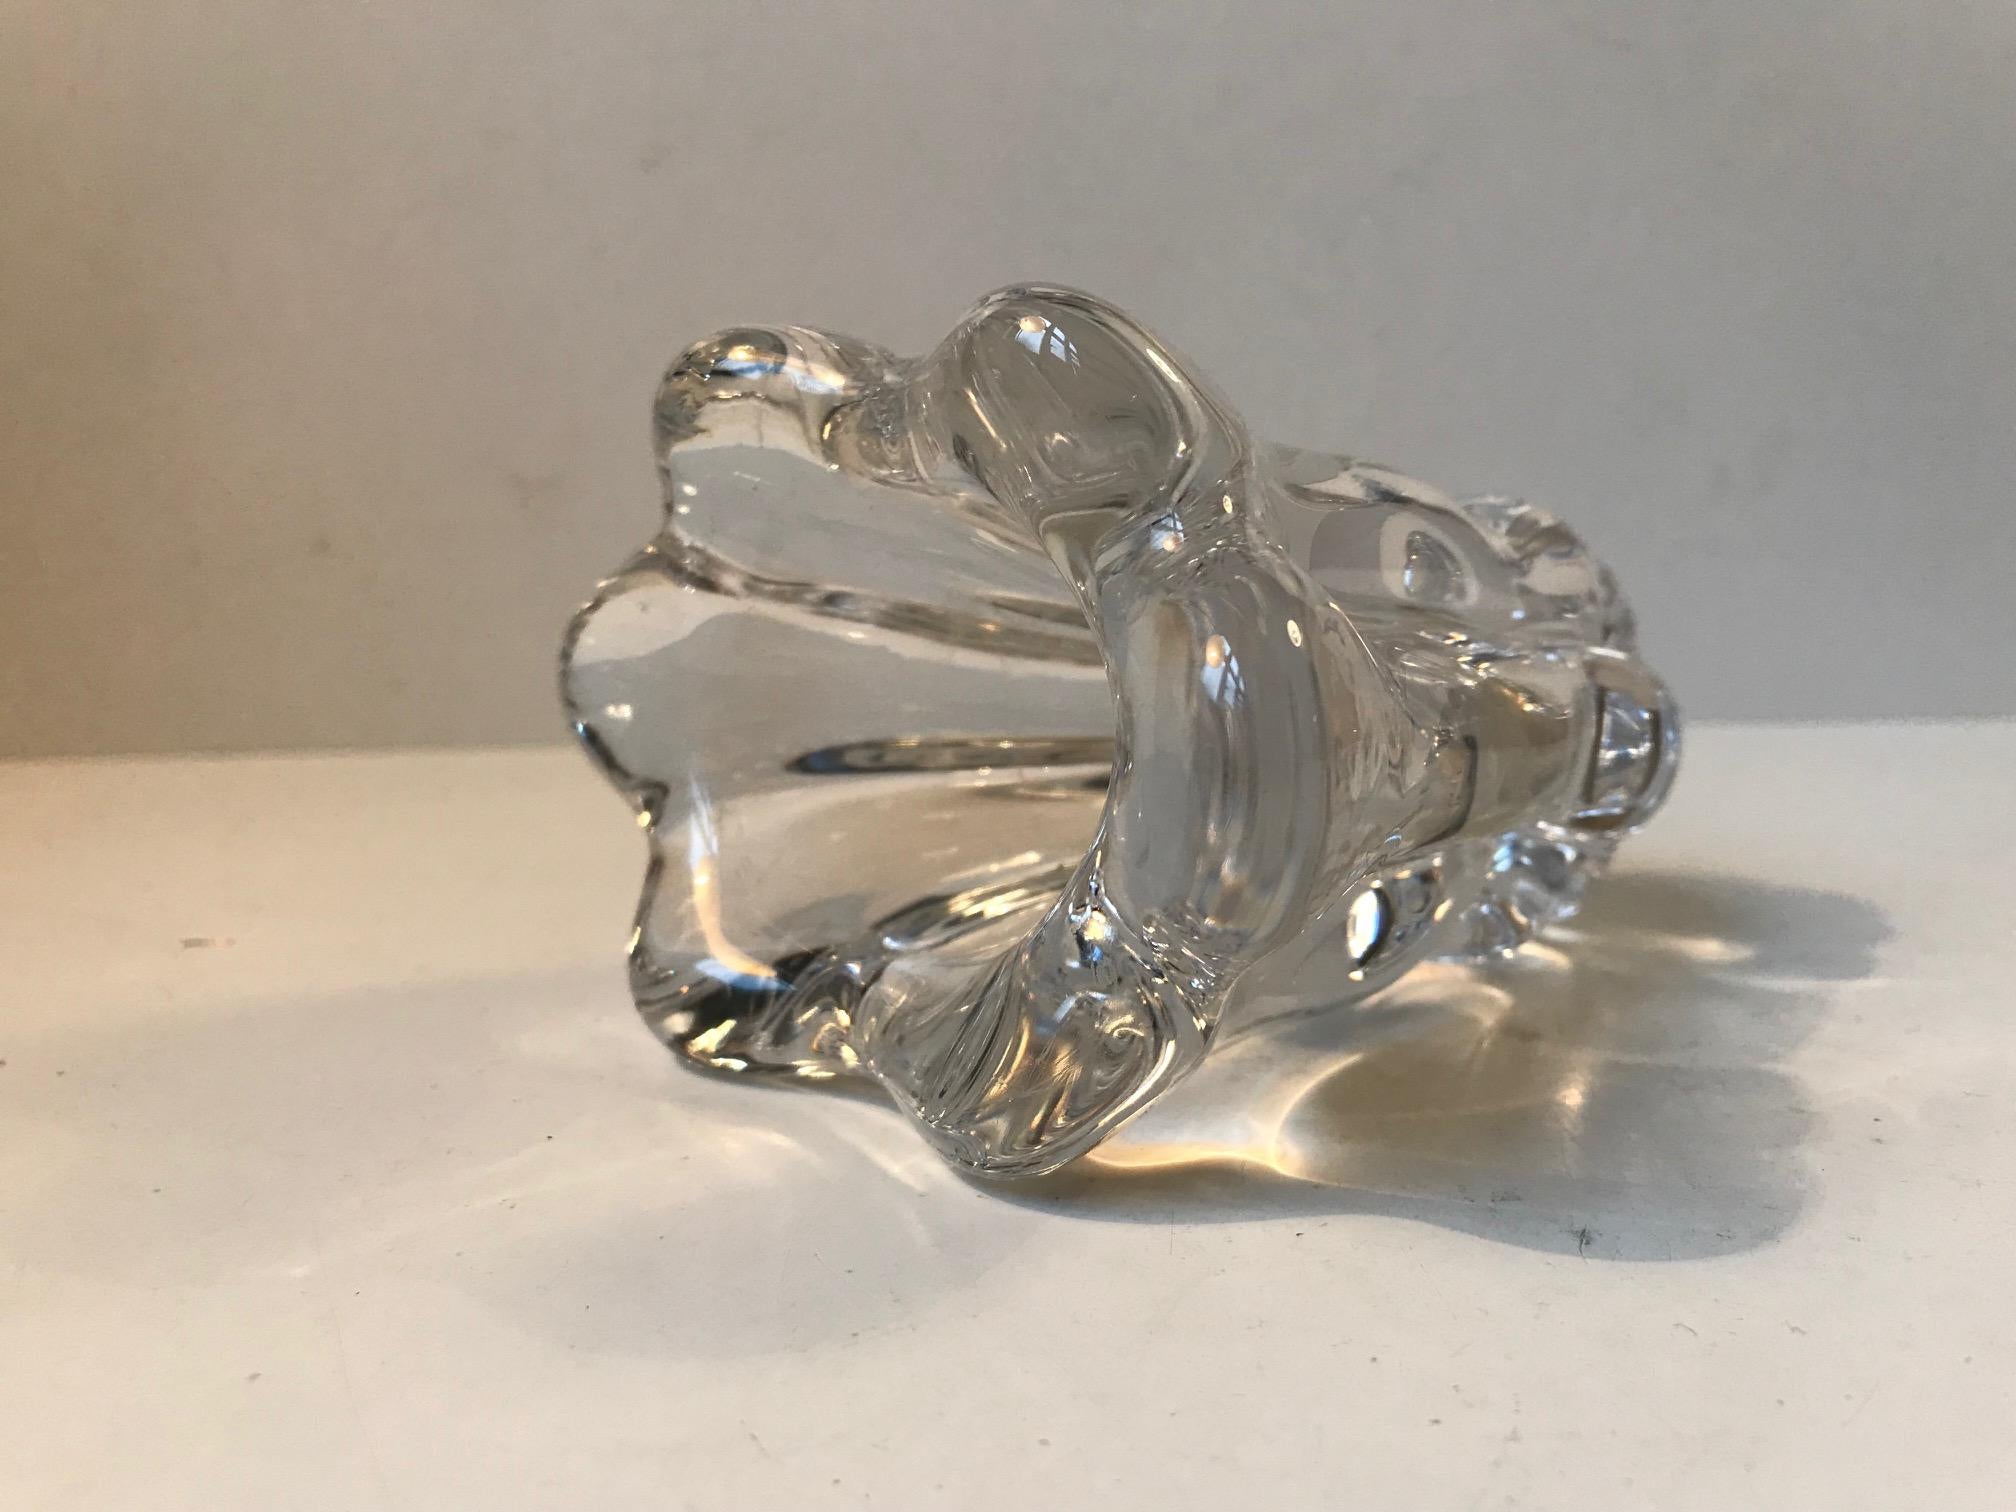 Thick organically shaped crystal vase. Number 3225 designed by Niels Landberg and manufactured at Orrefors in Sweden during the 1950s. The vase is marked, signed and numbered to the base.